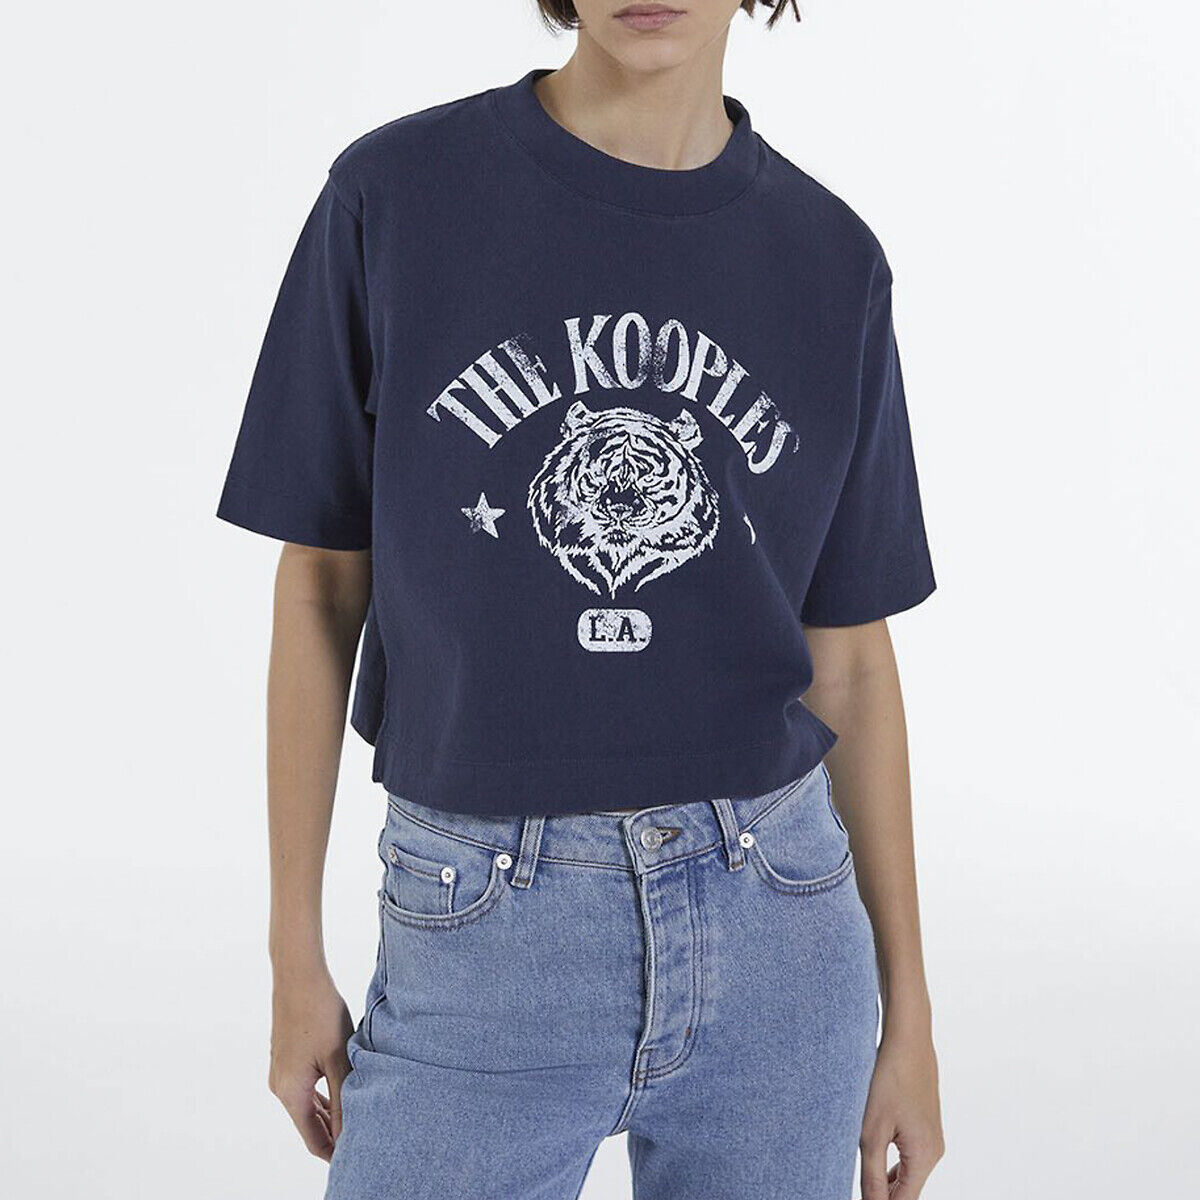 THE KOOPLES Tee shirt col rond manches courtes motif poitrine